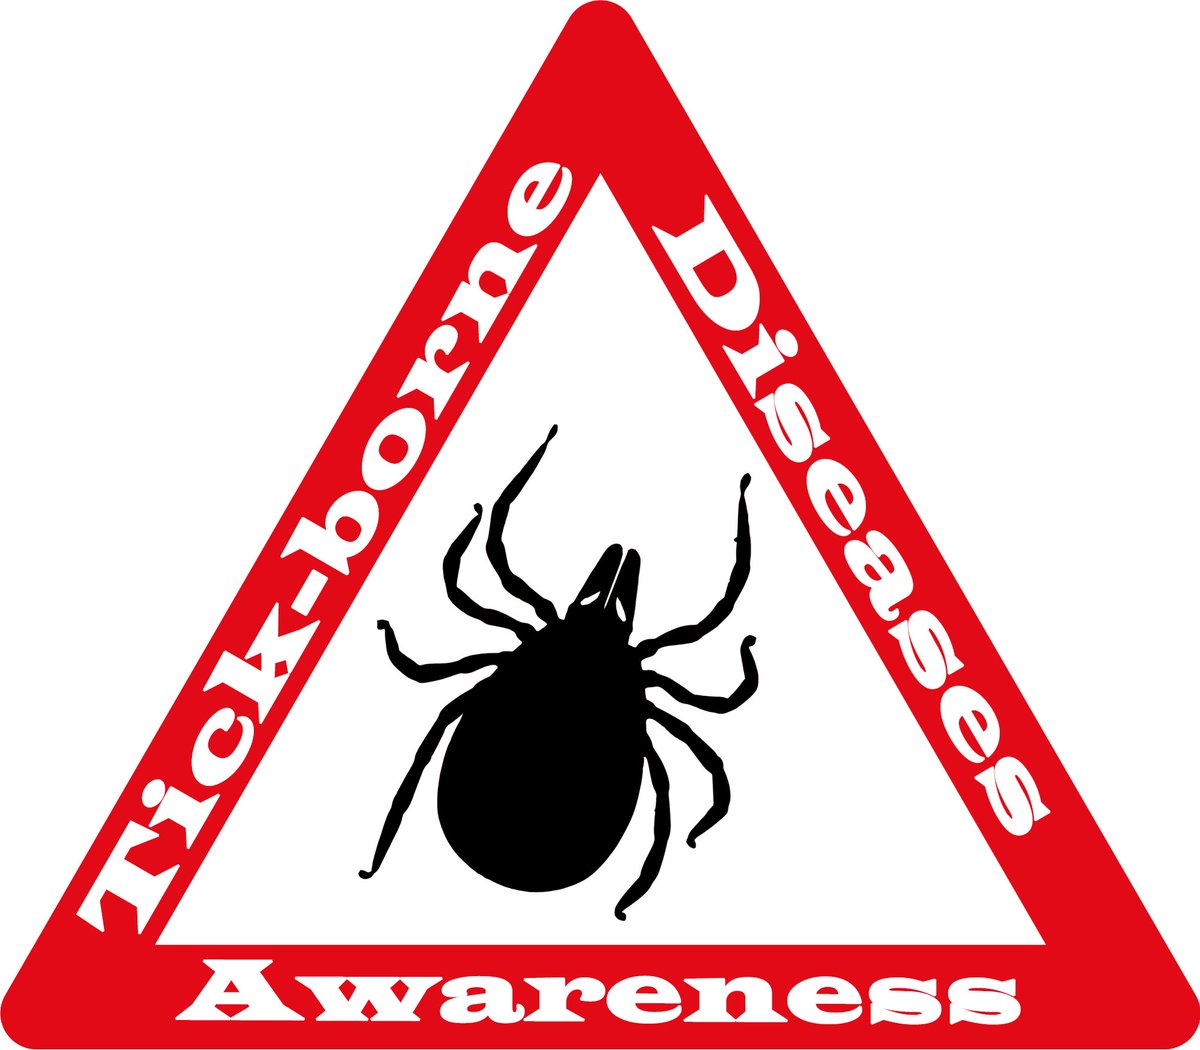 👋 New account here aiming to raise awareness, share information, and learn what's new in the world of #TickBorneDiseases

#SpreadtheWord #FollowBackFriday #MakingConnections
#LymeDiseaseAwarenessMonth